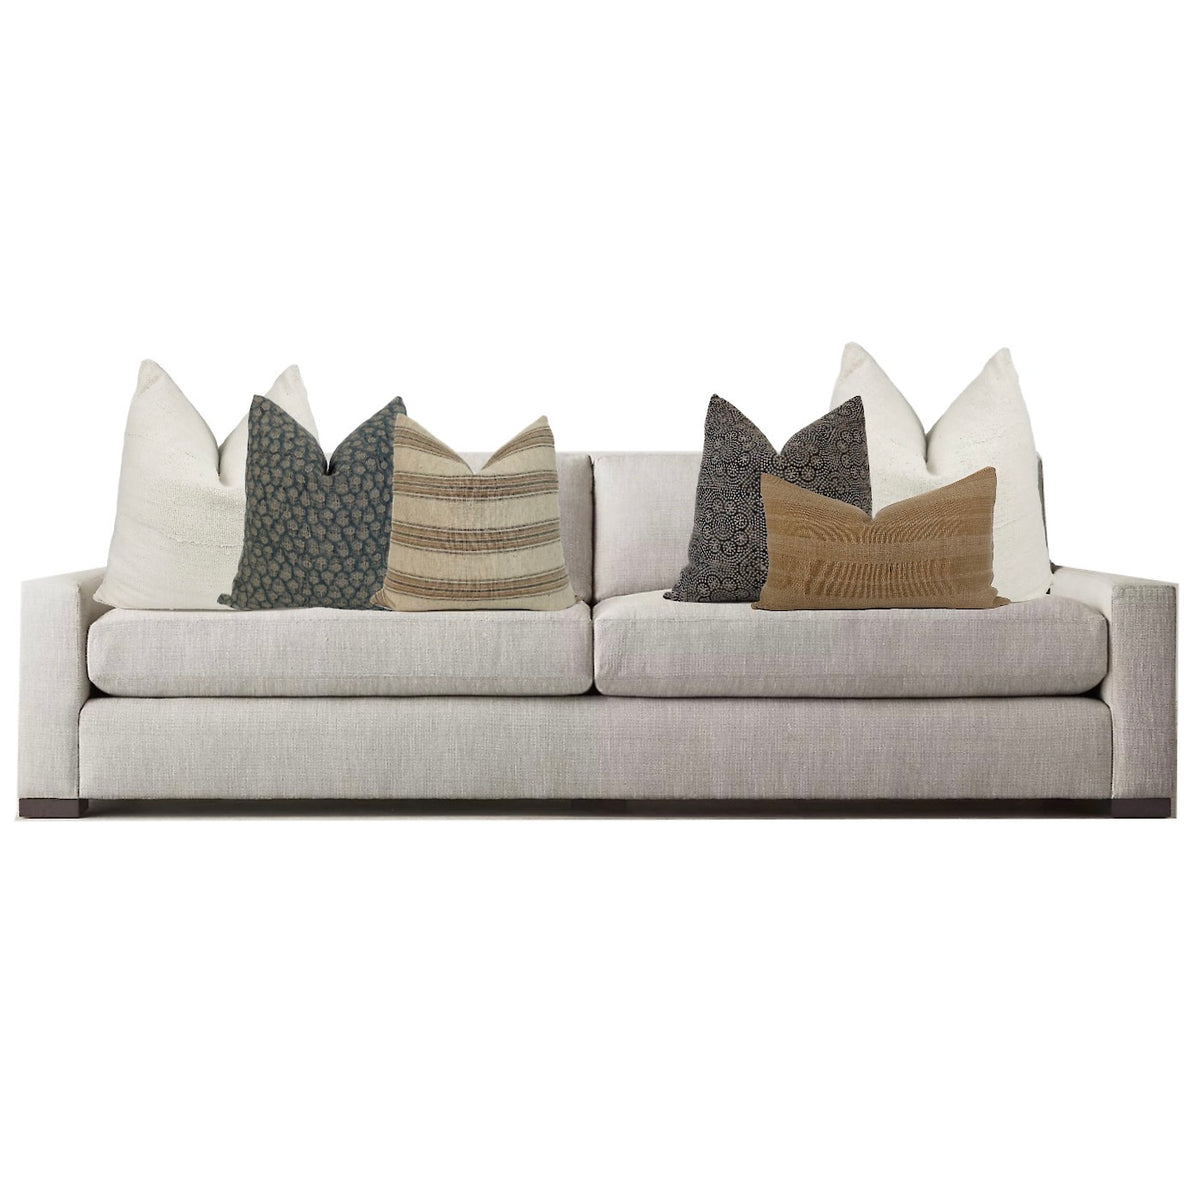 Amy Pillow Set on a gray couch